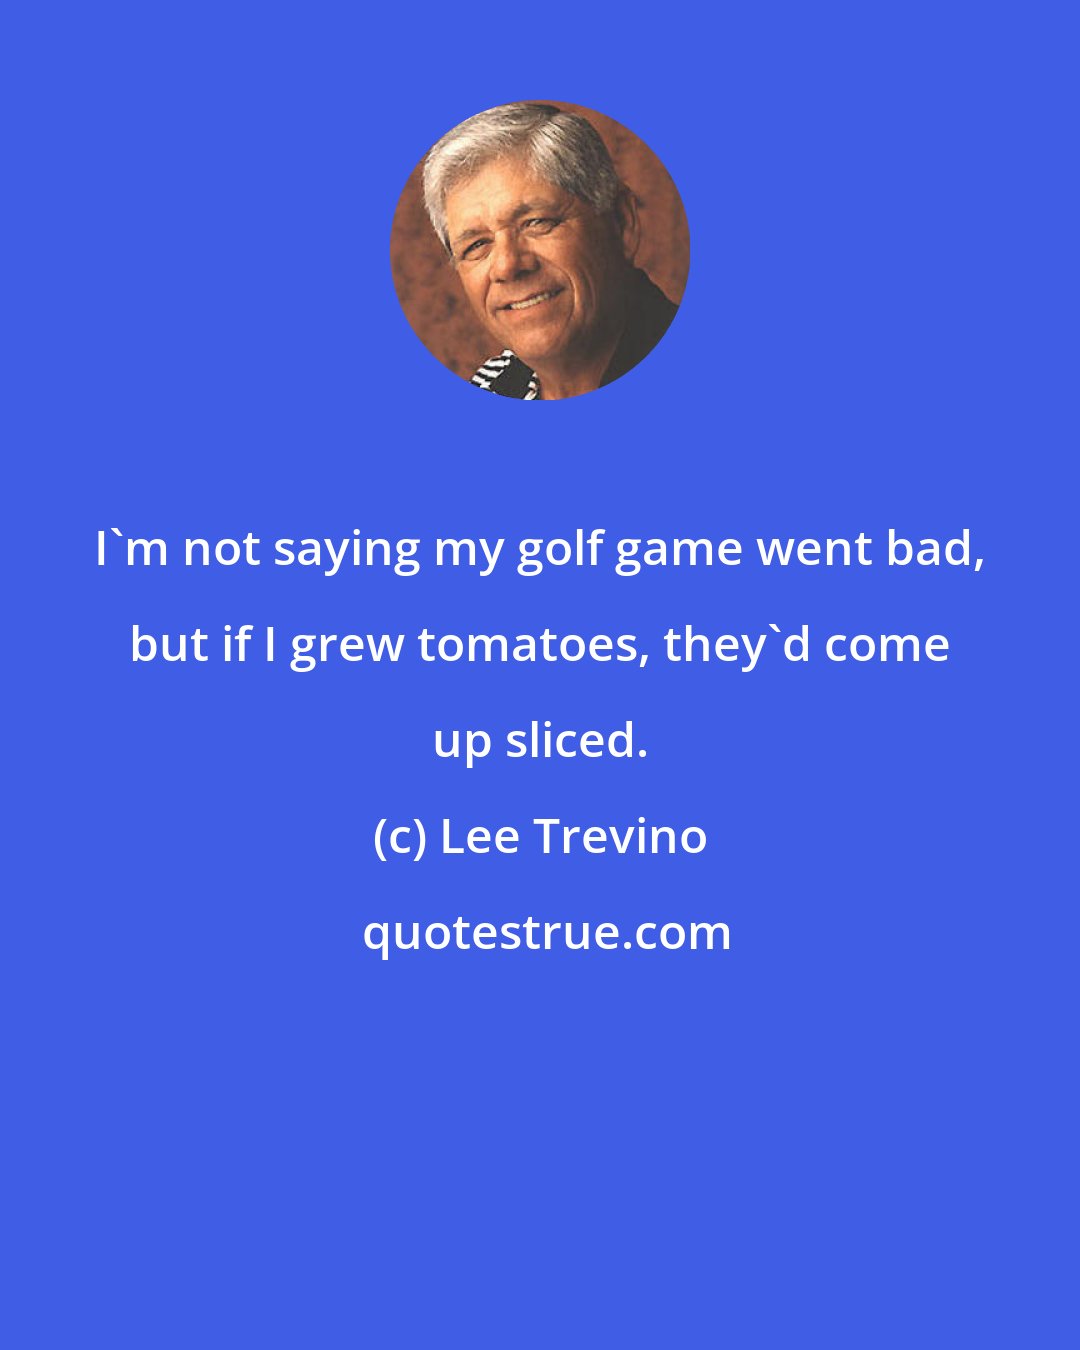 Lee Trevino: I'm not saying my golf game went bad, but if I grew tomatoes, they'd come up sliced.